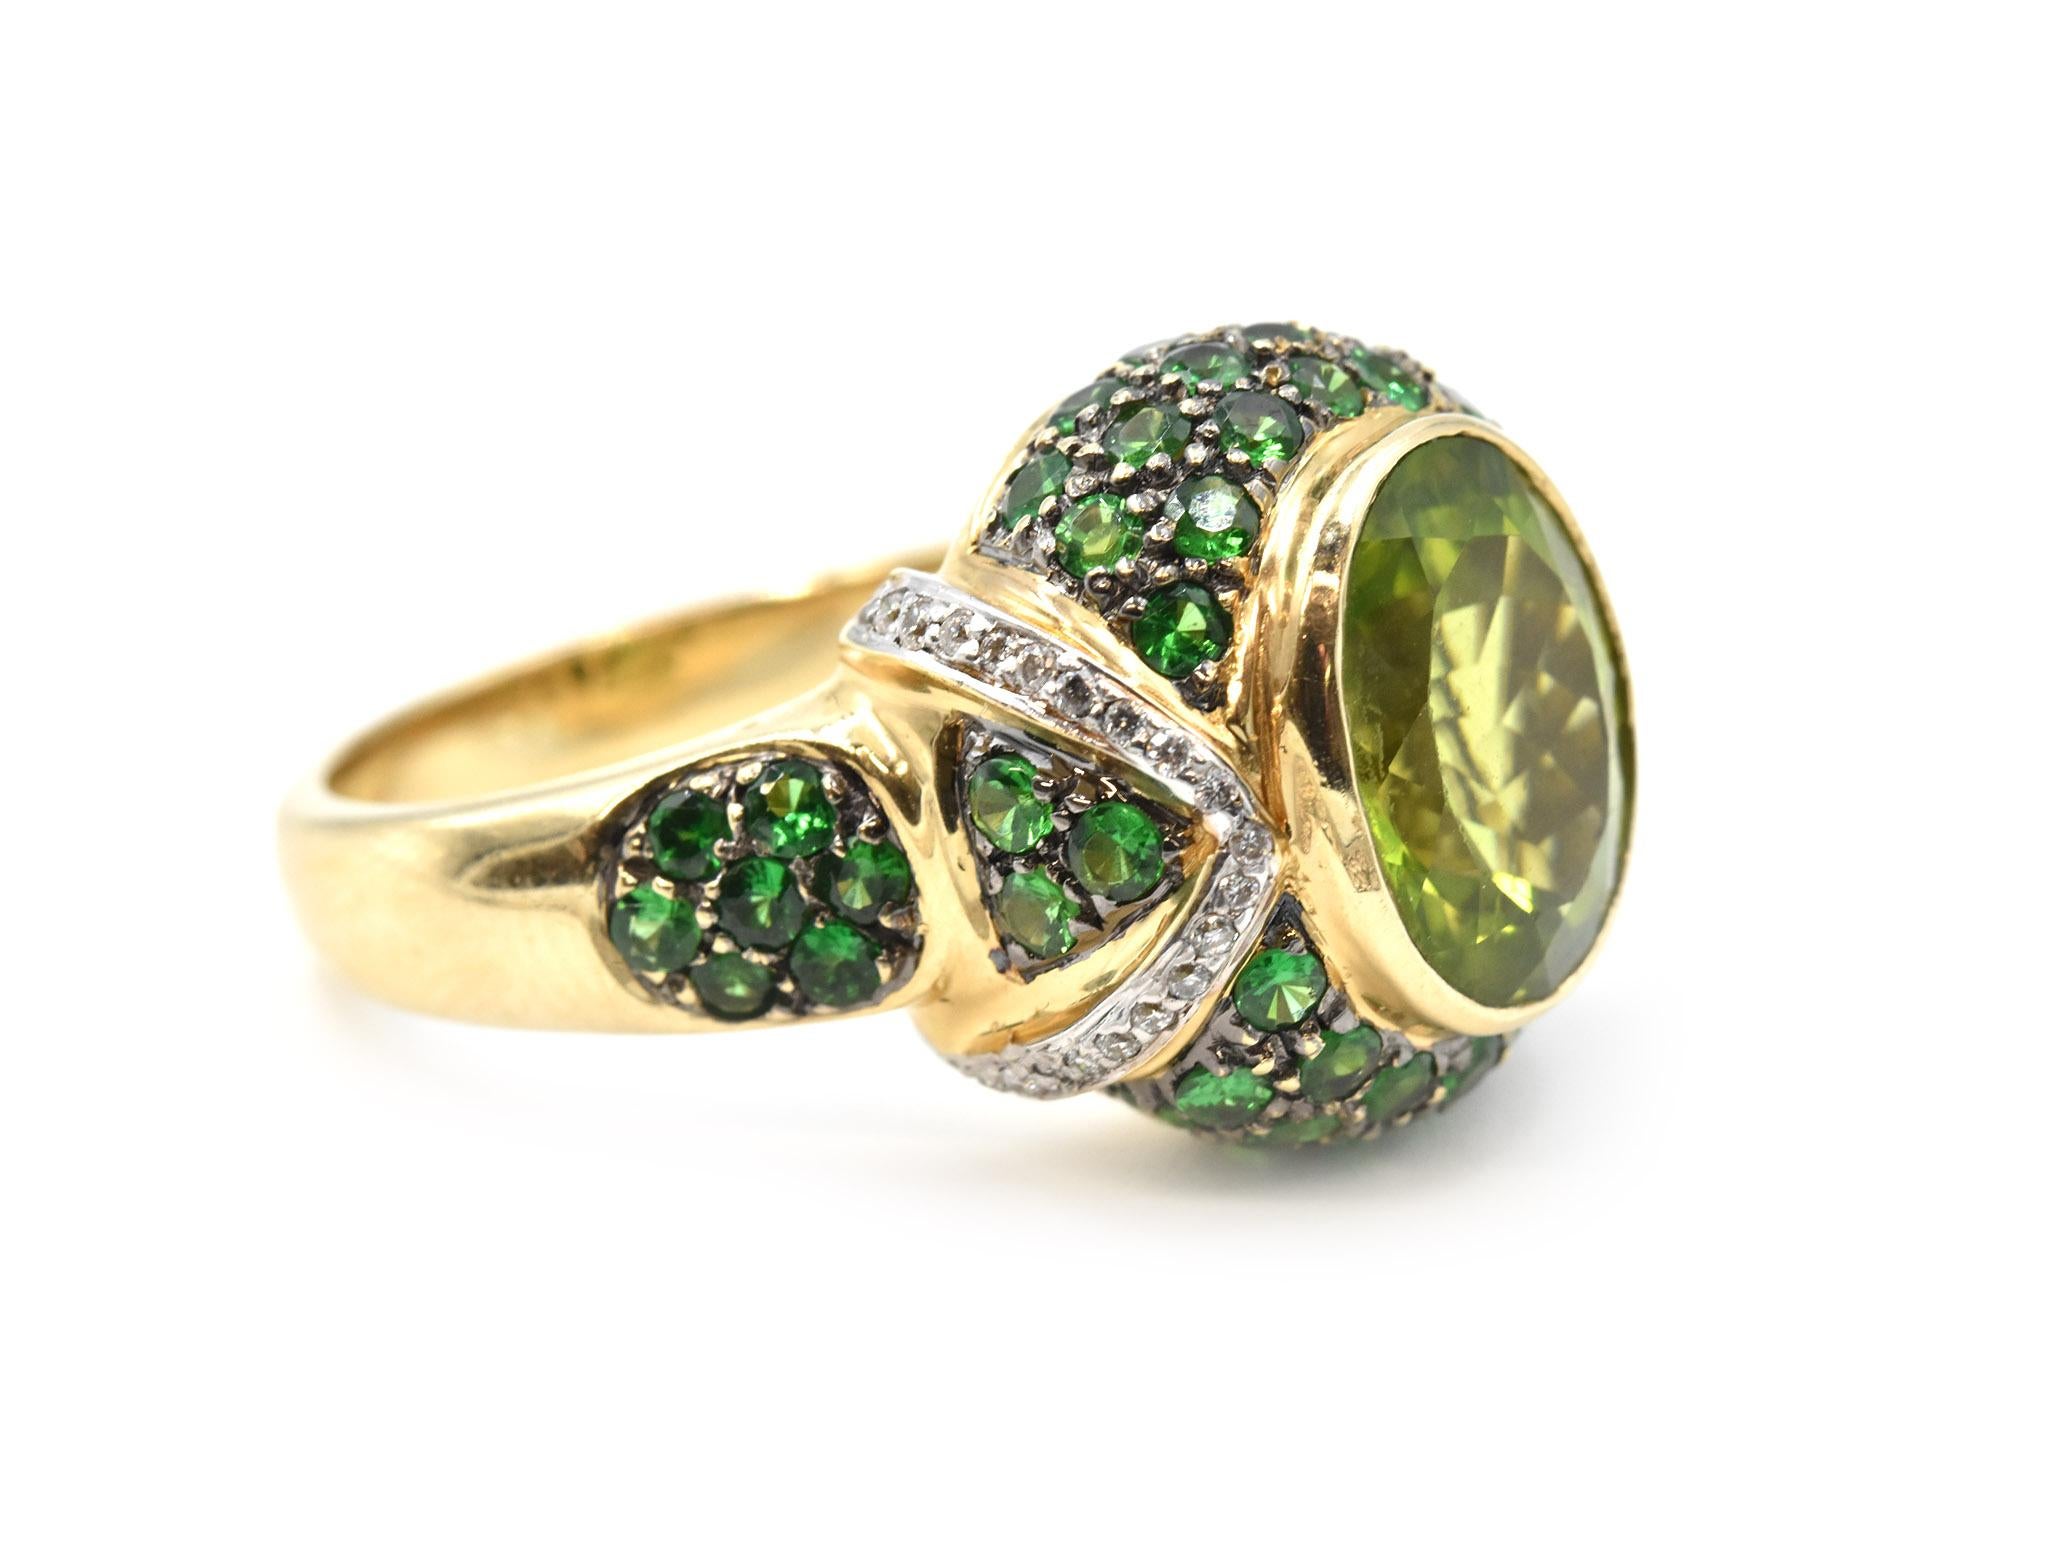 Designer: custom design
Material: 14k yellow gold 
Peridot: 4.40 carat oval peridot
Tsavorites: 3.25 carat weight
Diamonds: 40 round brilliant cut = 0.30 carat weight 
Ring Size: 7 (please allow two additional shipping days for sizing requests)